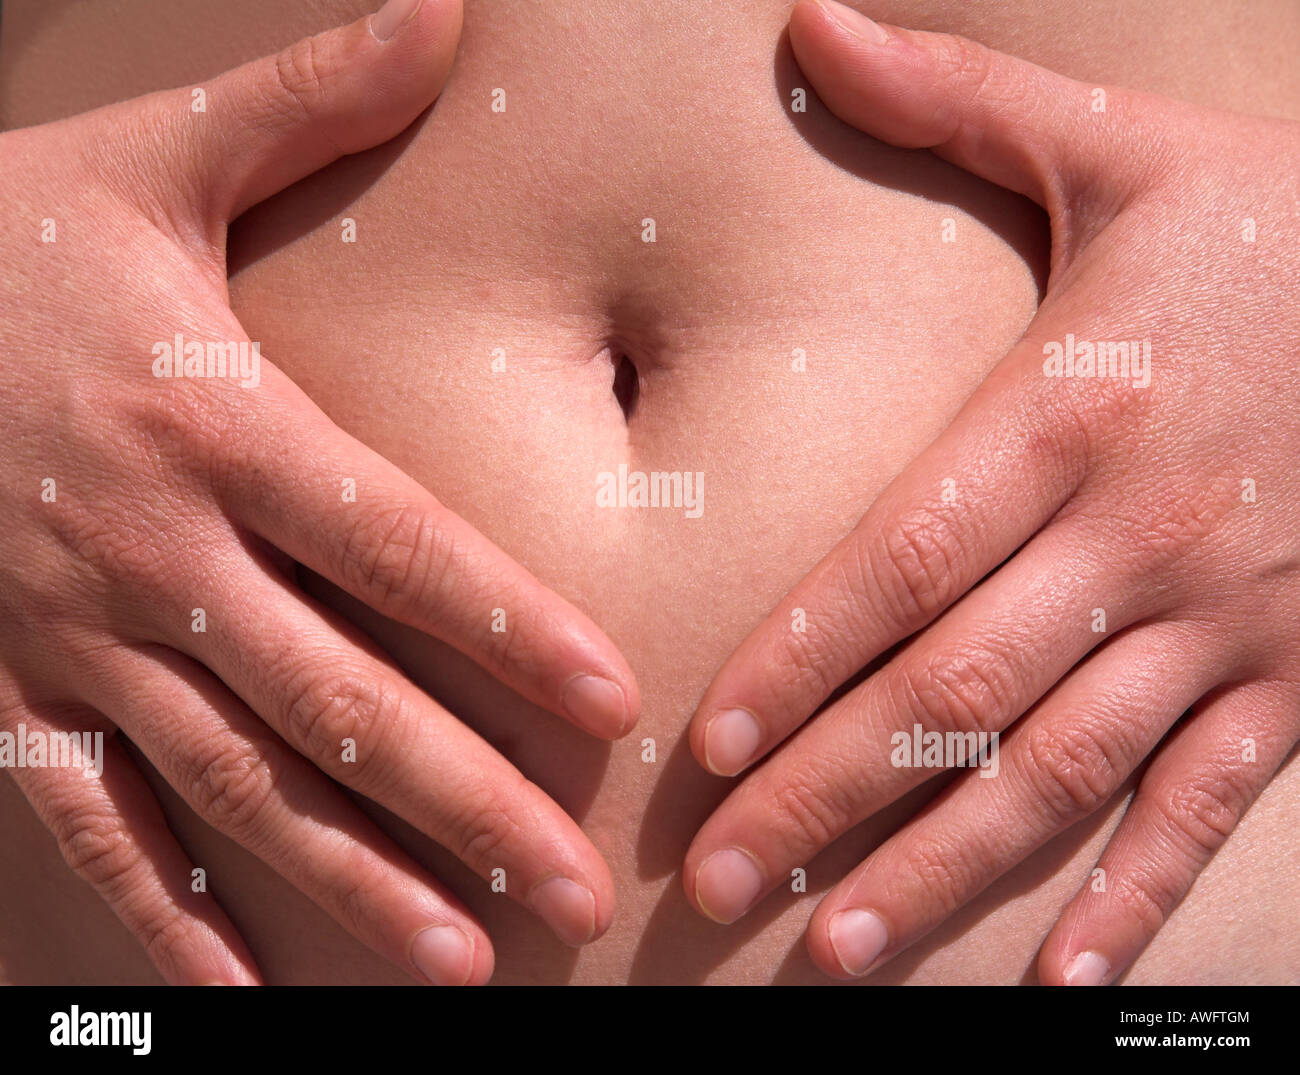 Tummy and hands Stock Photo